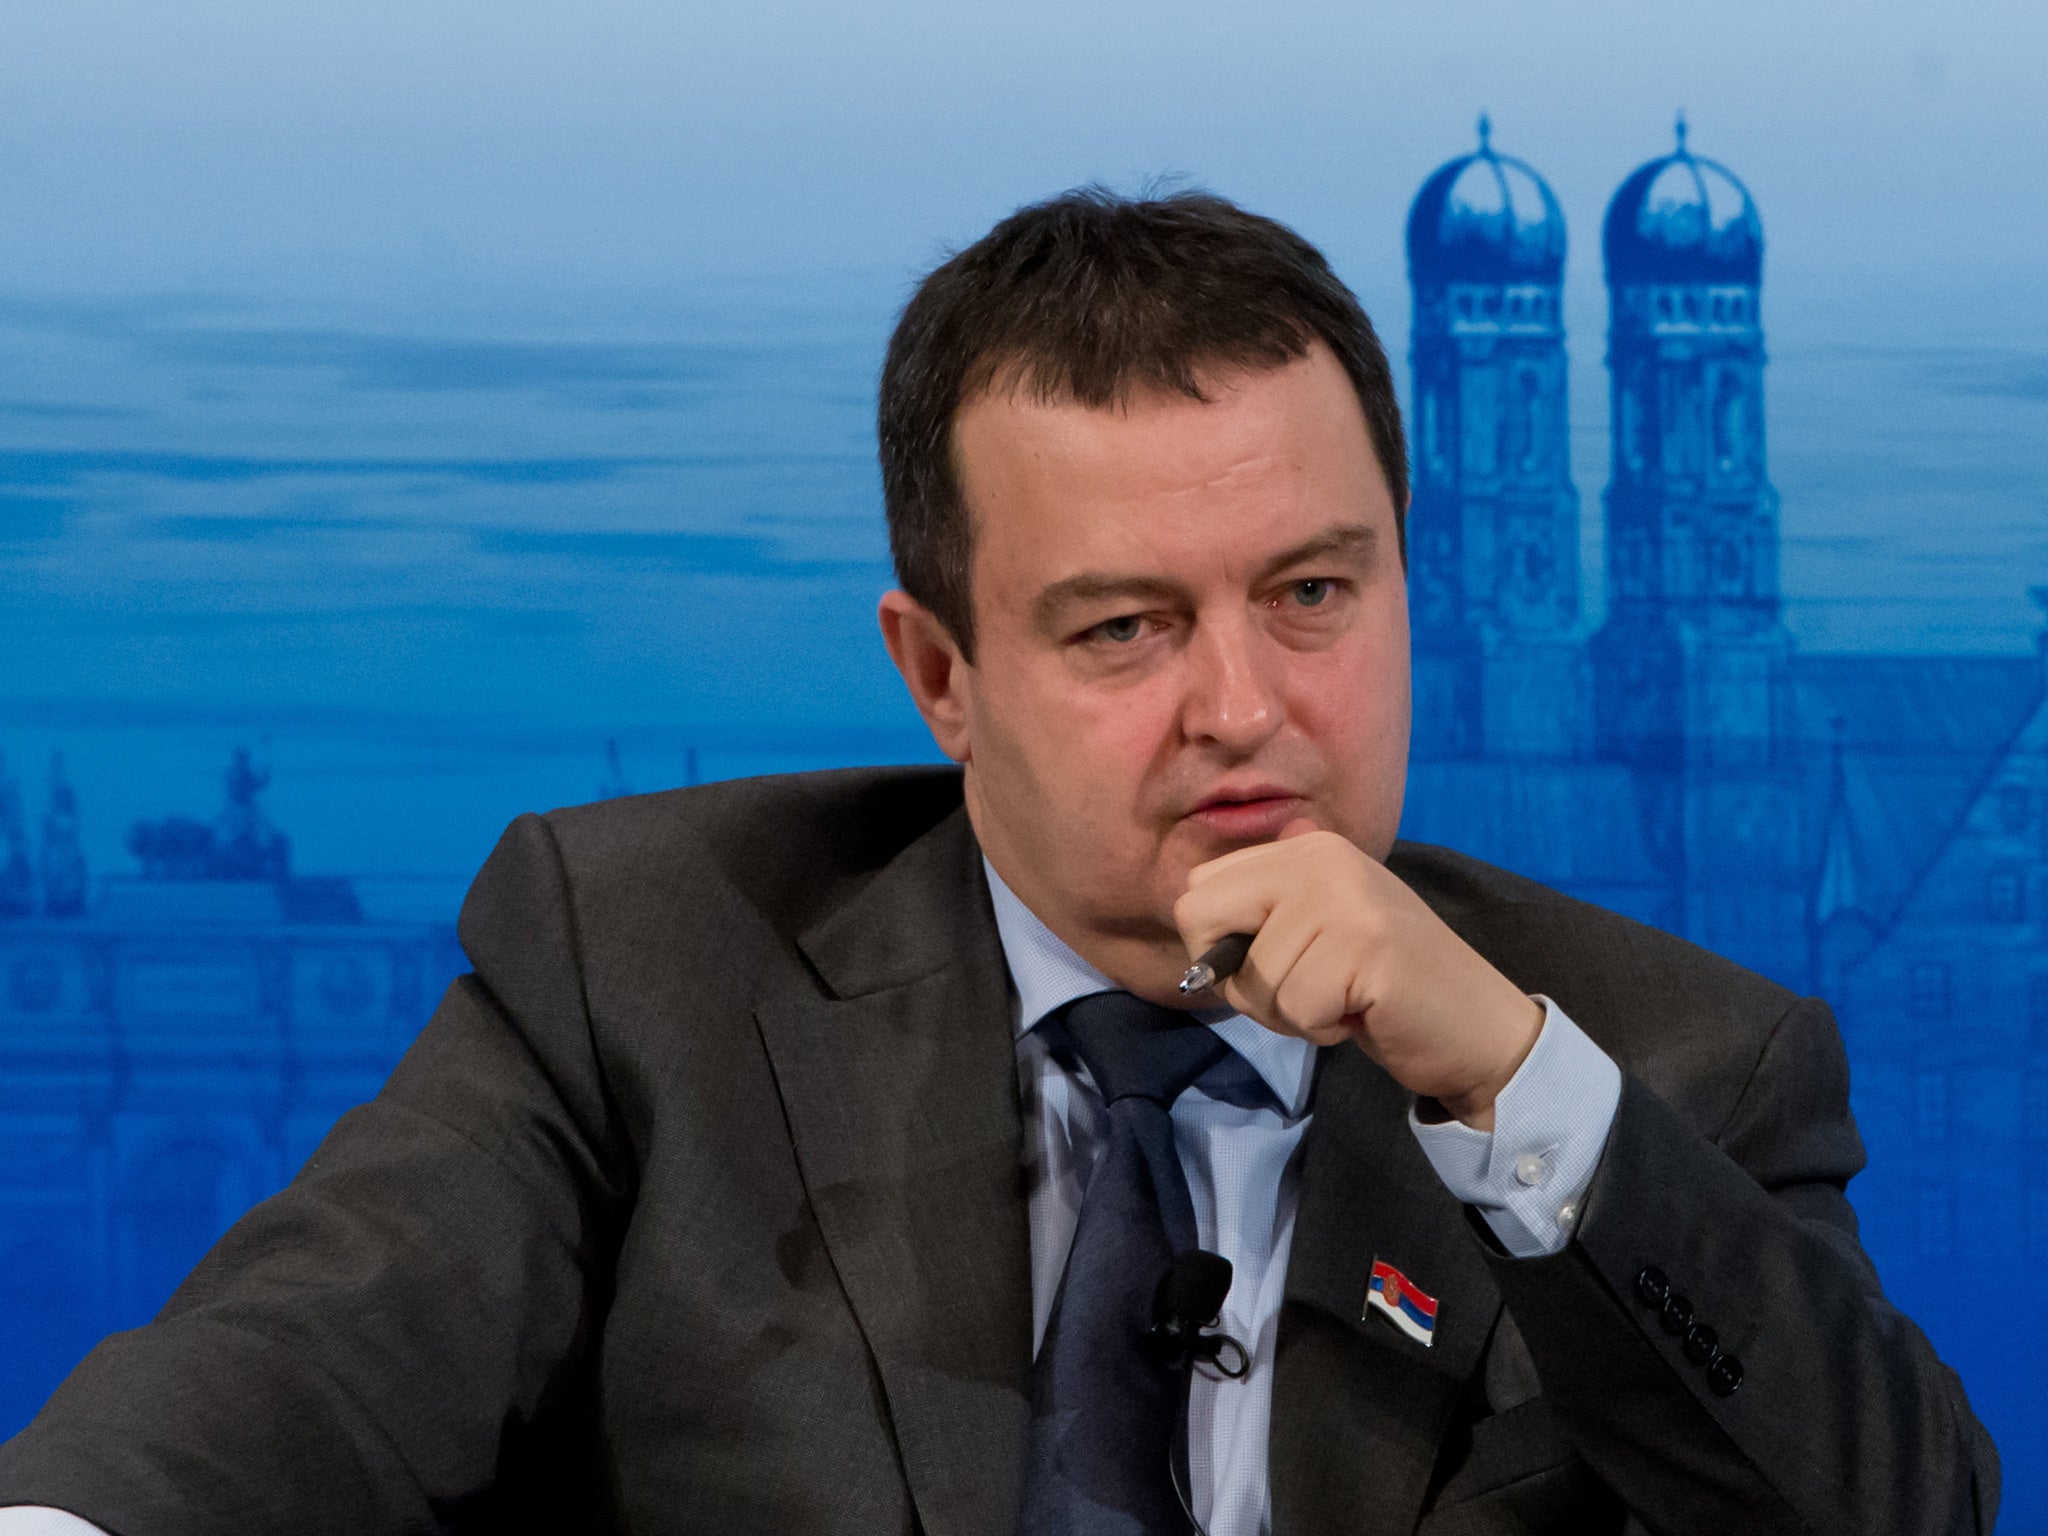 Serbian Prime Minister Ivica Dacic faces a battle to be re-elected next month